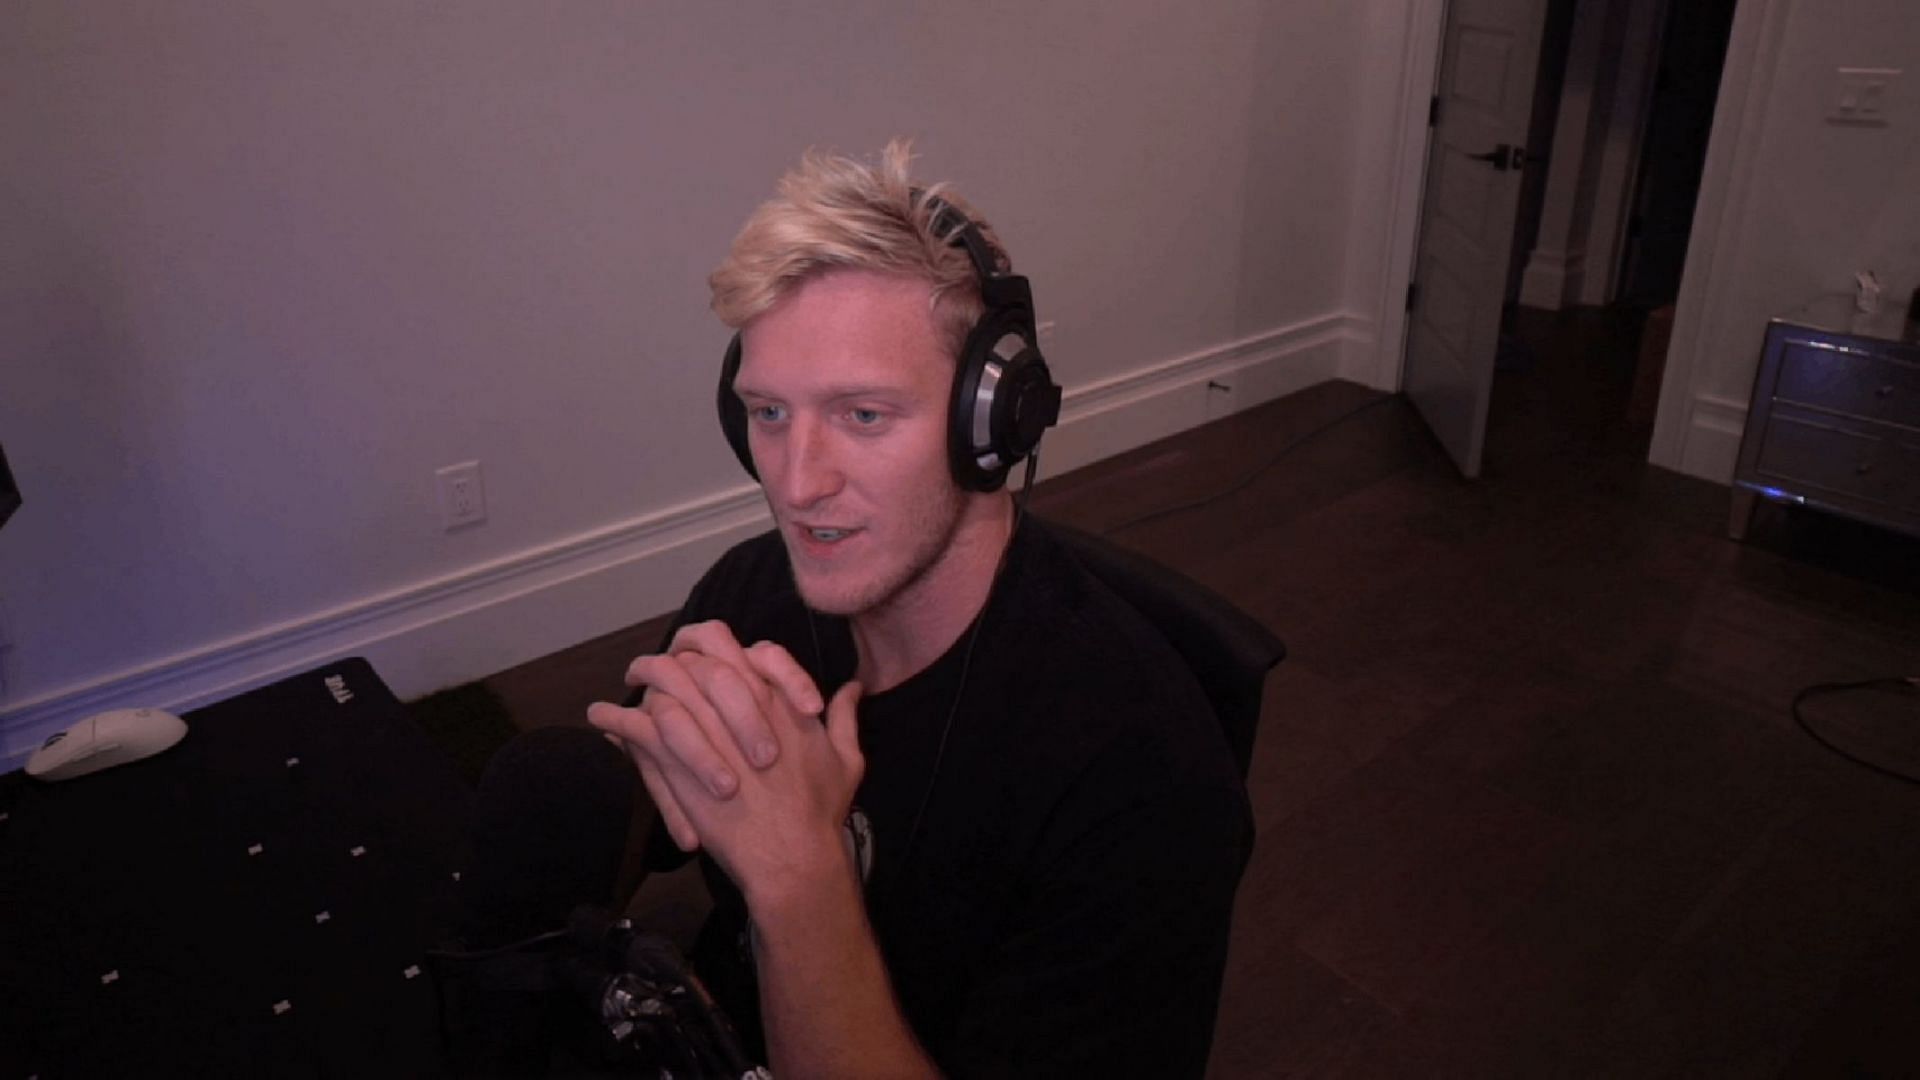 Tfue was gifted a thousand subs on his recent Twitch stream by a random stranger in chat (Image via Tfue/Twitch)